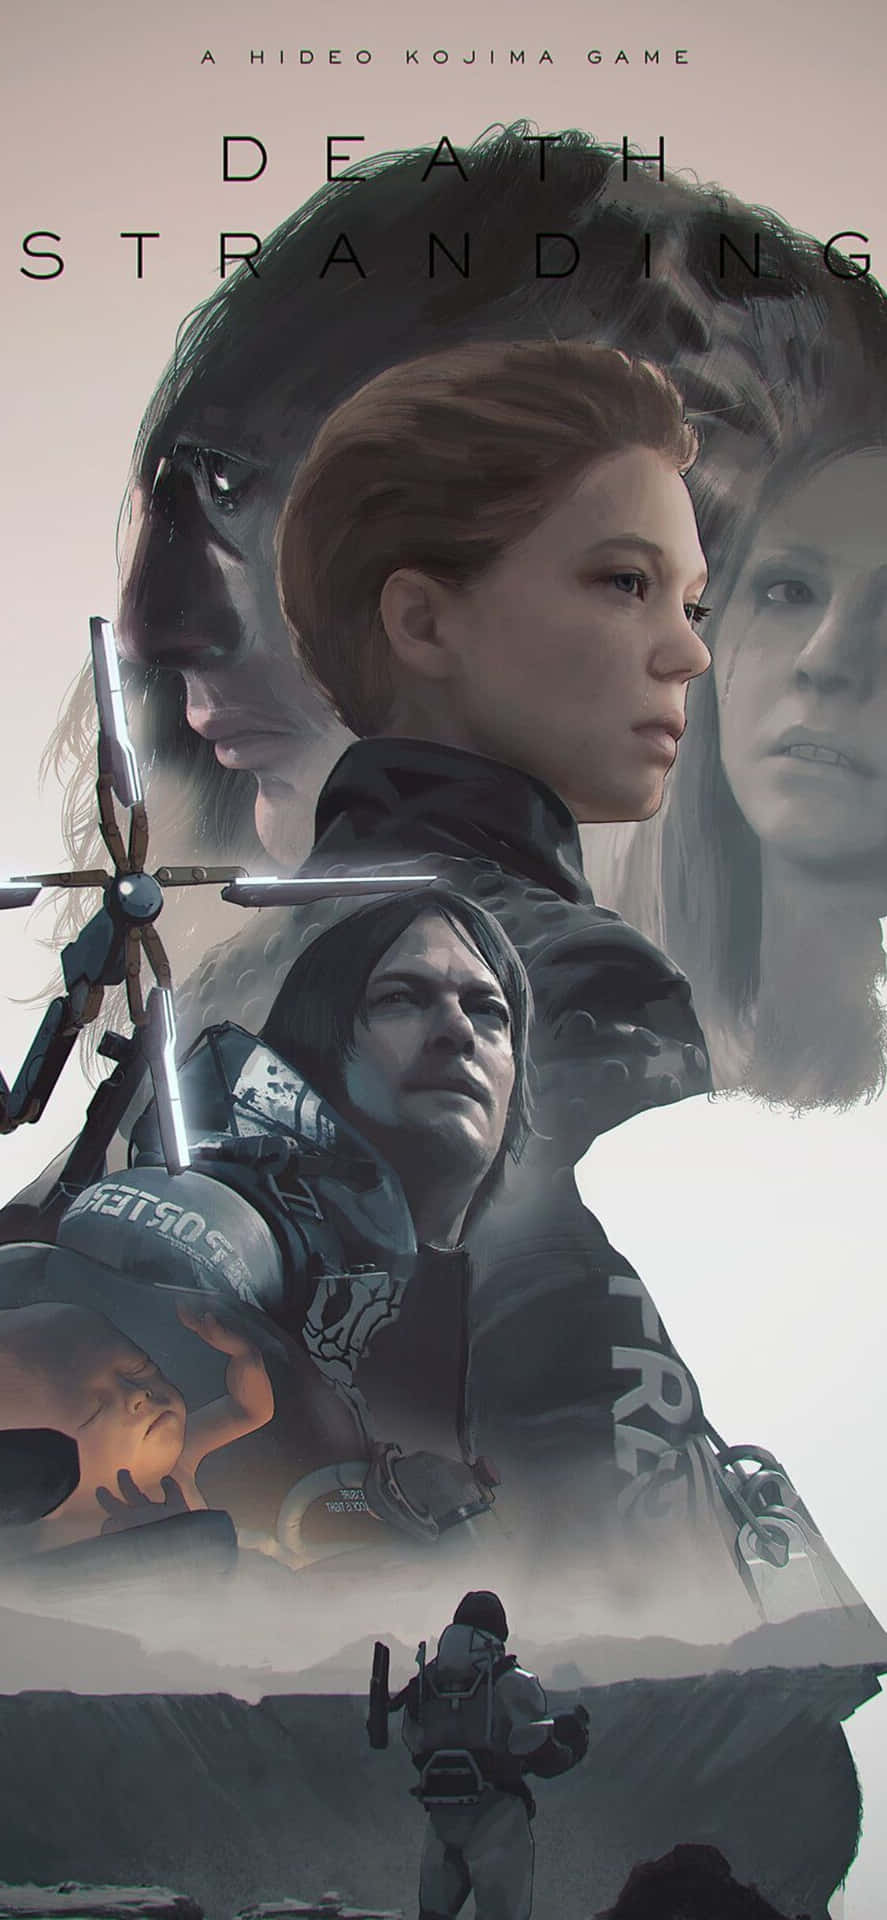 Uncover the mysteries of Death Stranding on your Iphone X